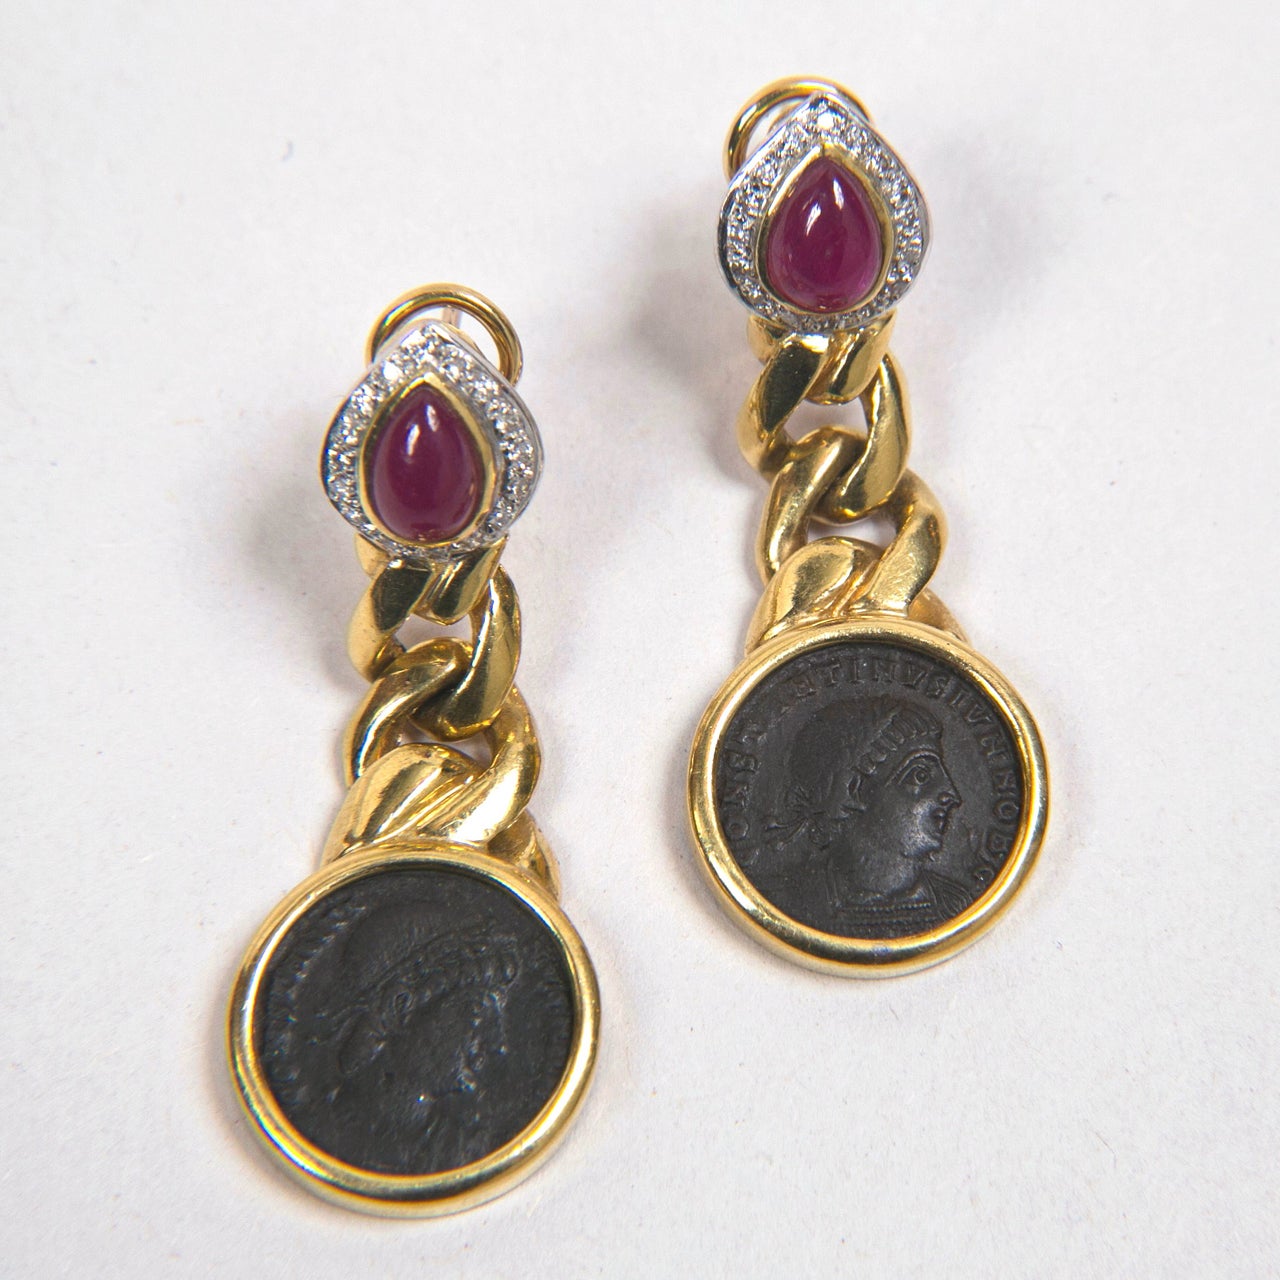 Pair of Italian Gold Earrings With Roman Coins 2